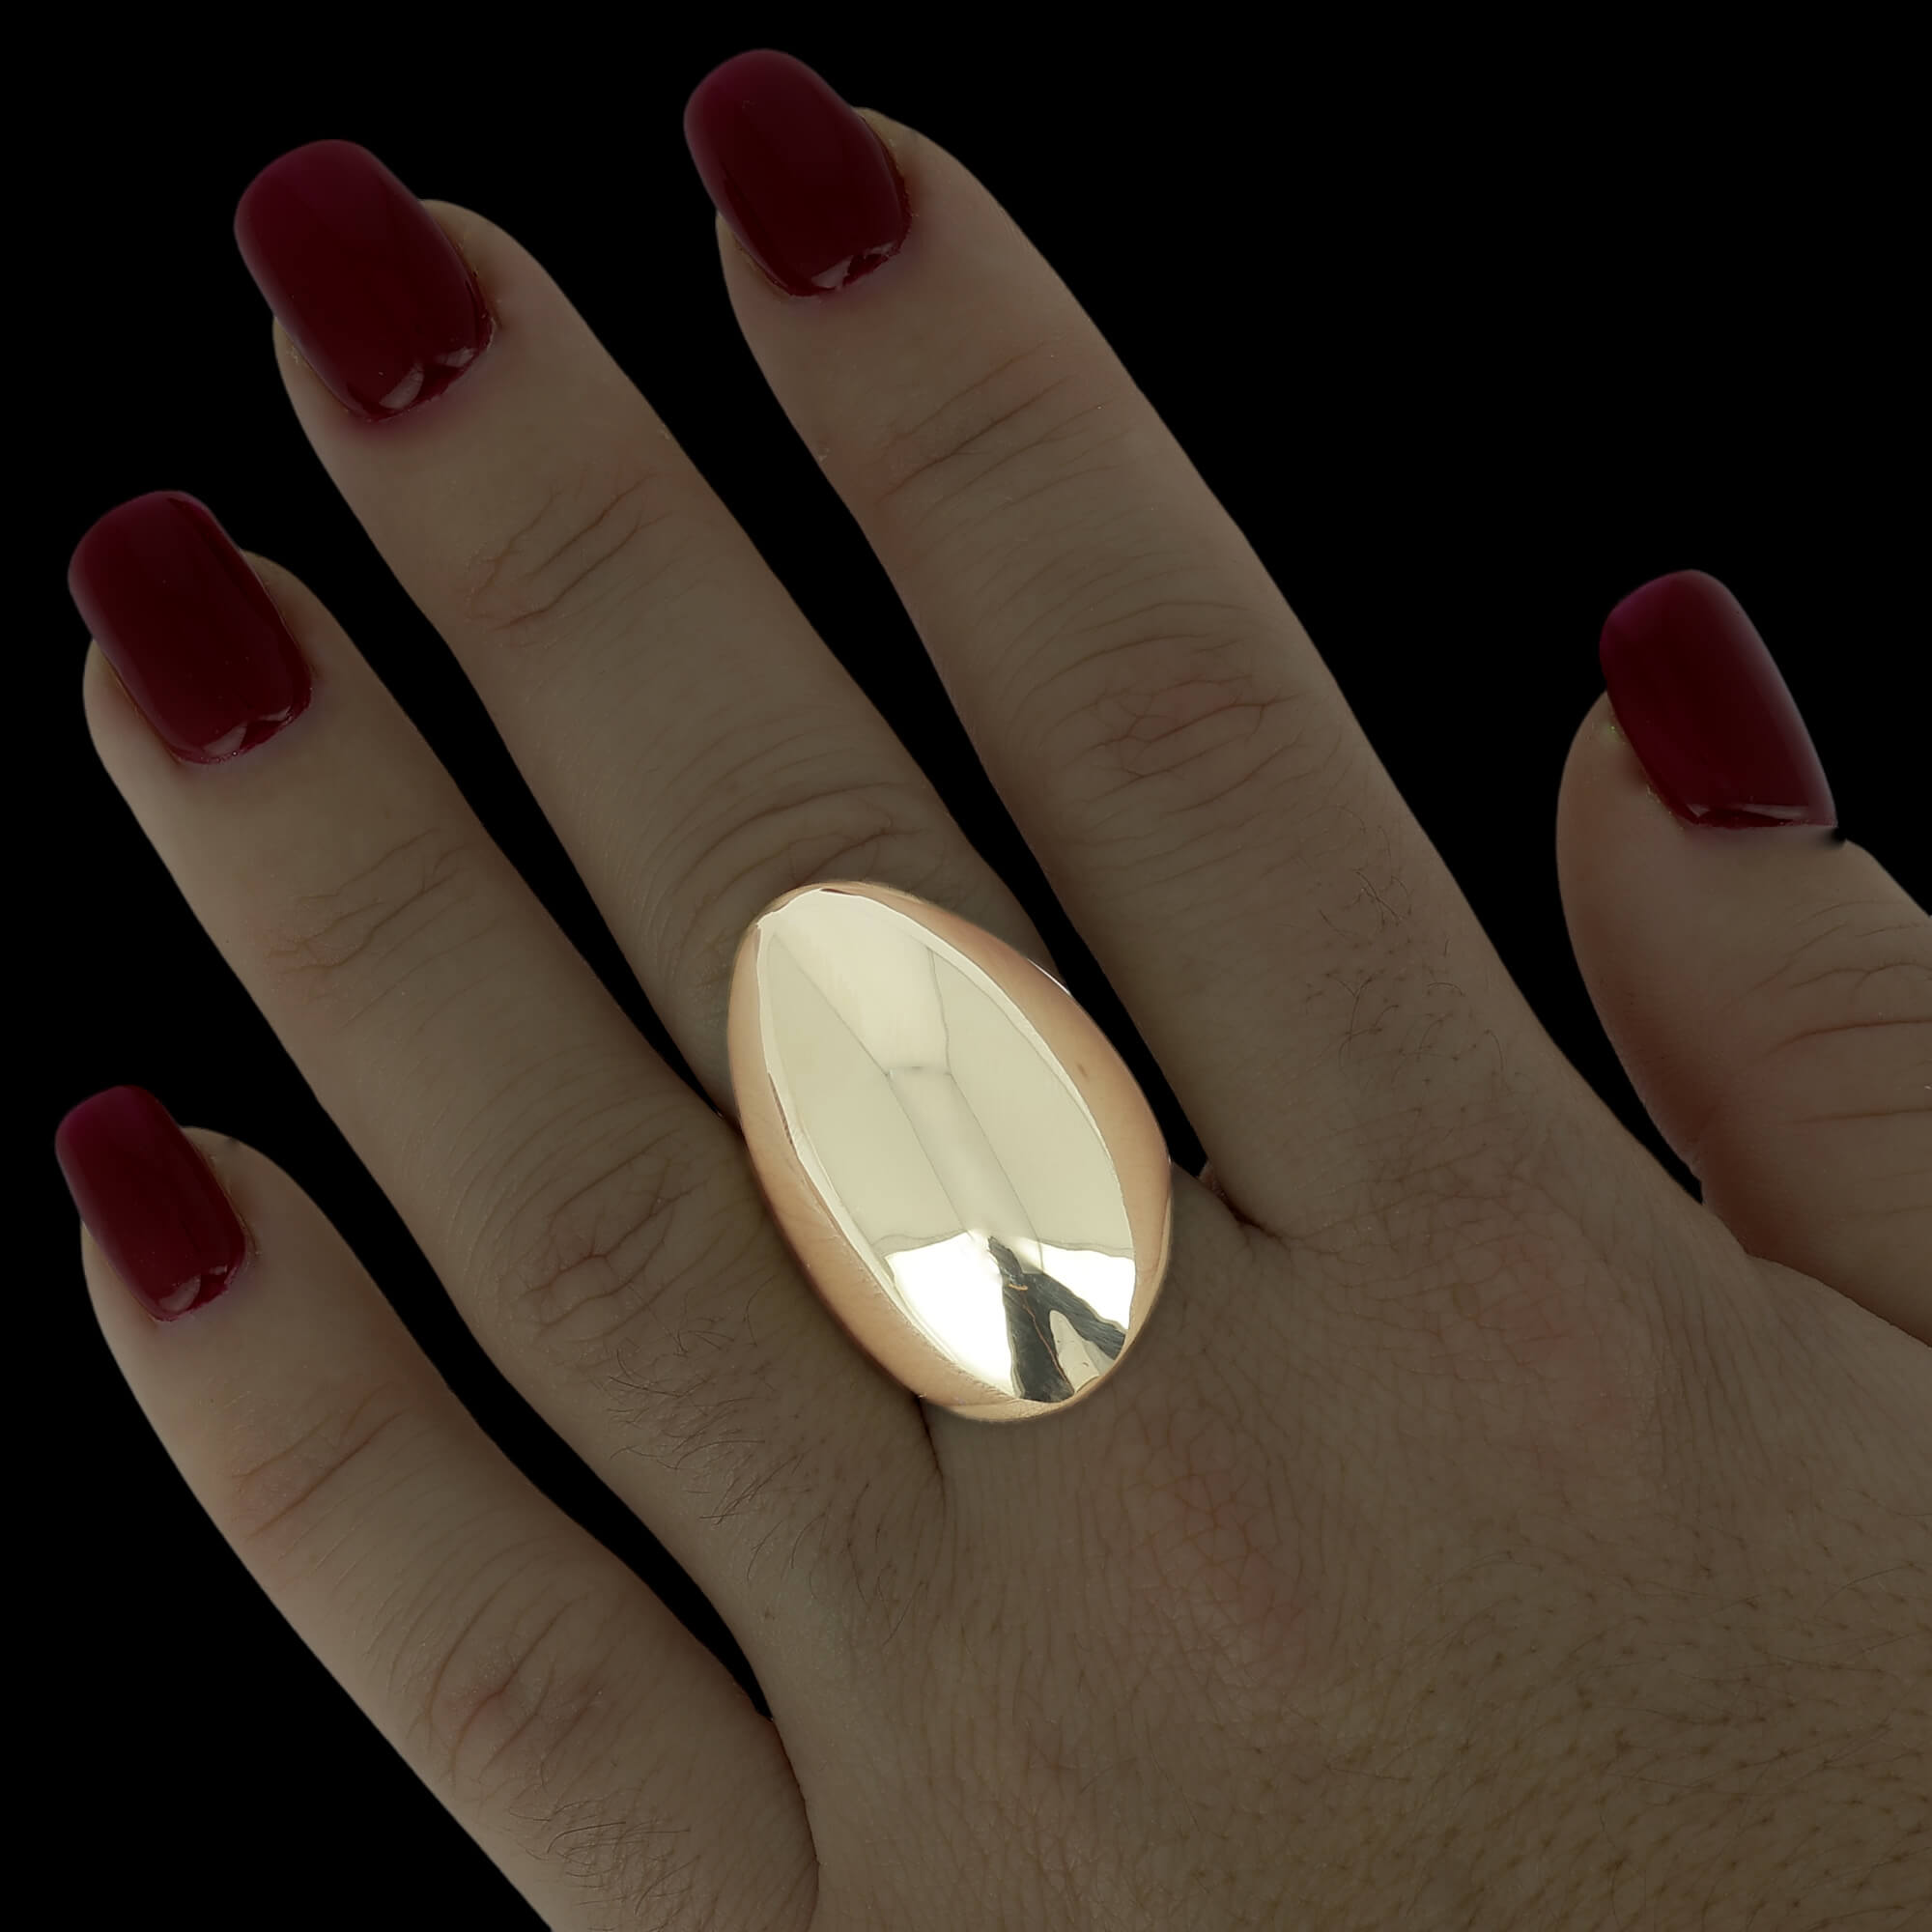 Gold and polished oblong ring, 14kt